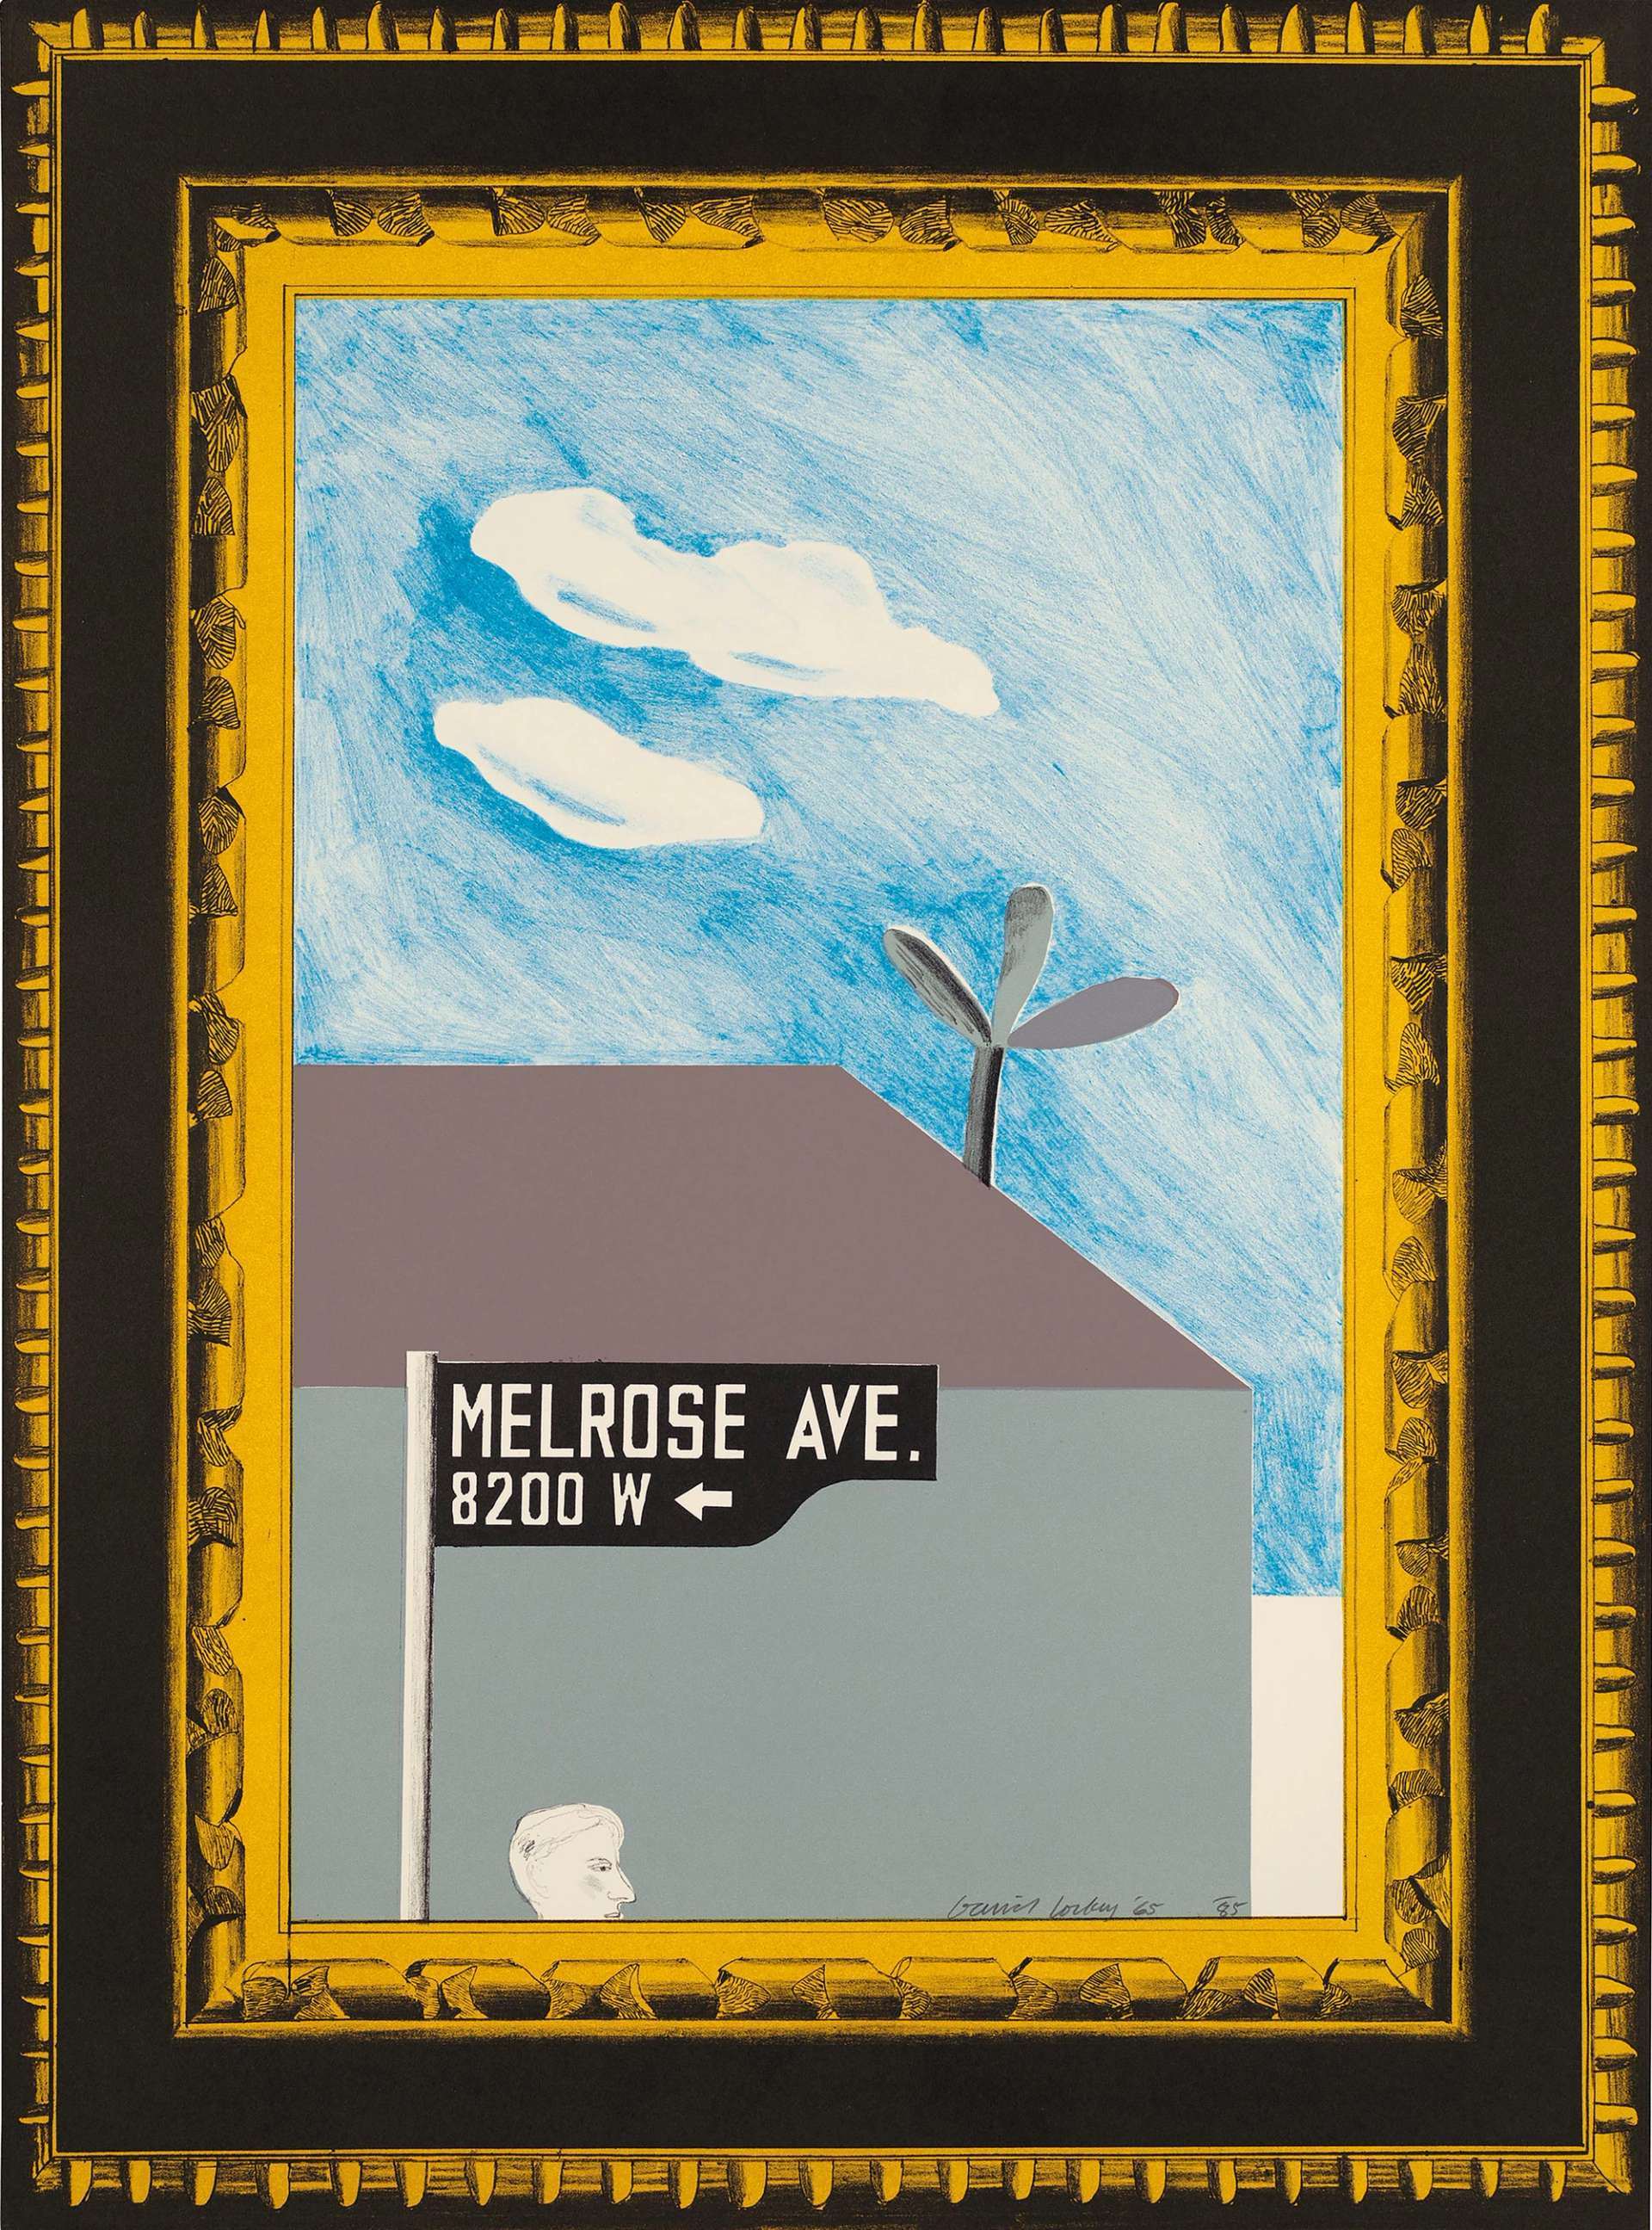 David Hockney's Picture Of Melrose Avenue In An Ornate Gold Frame. A lithographic print of a visible street sign "8200 W Melrose Ave." in front of a house and cloudy, blue skies. 